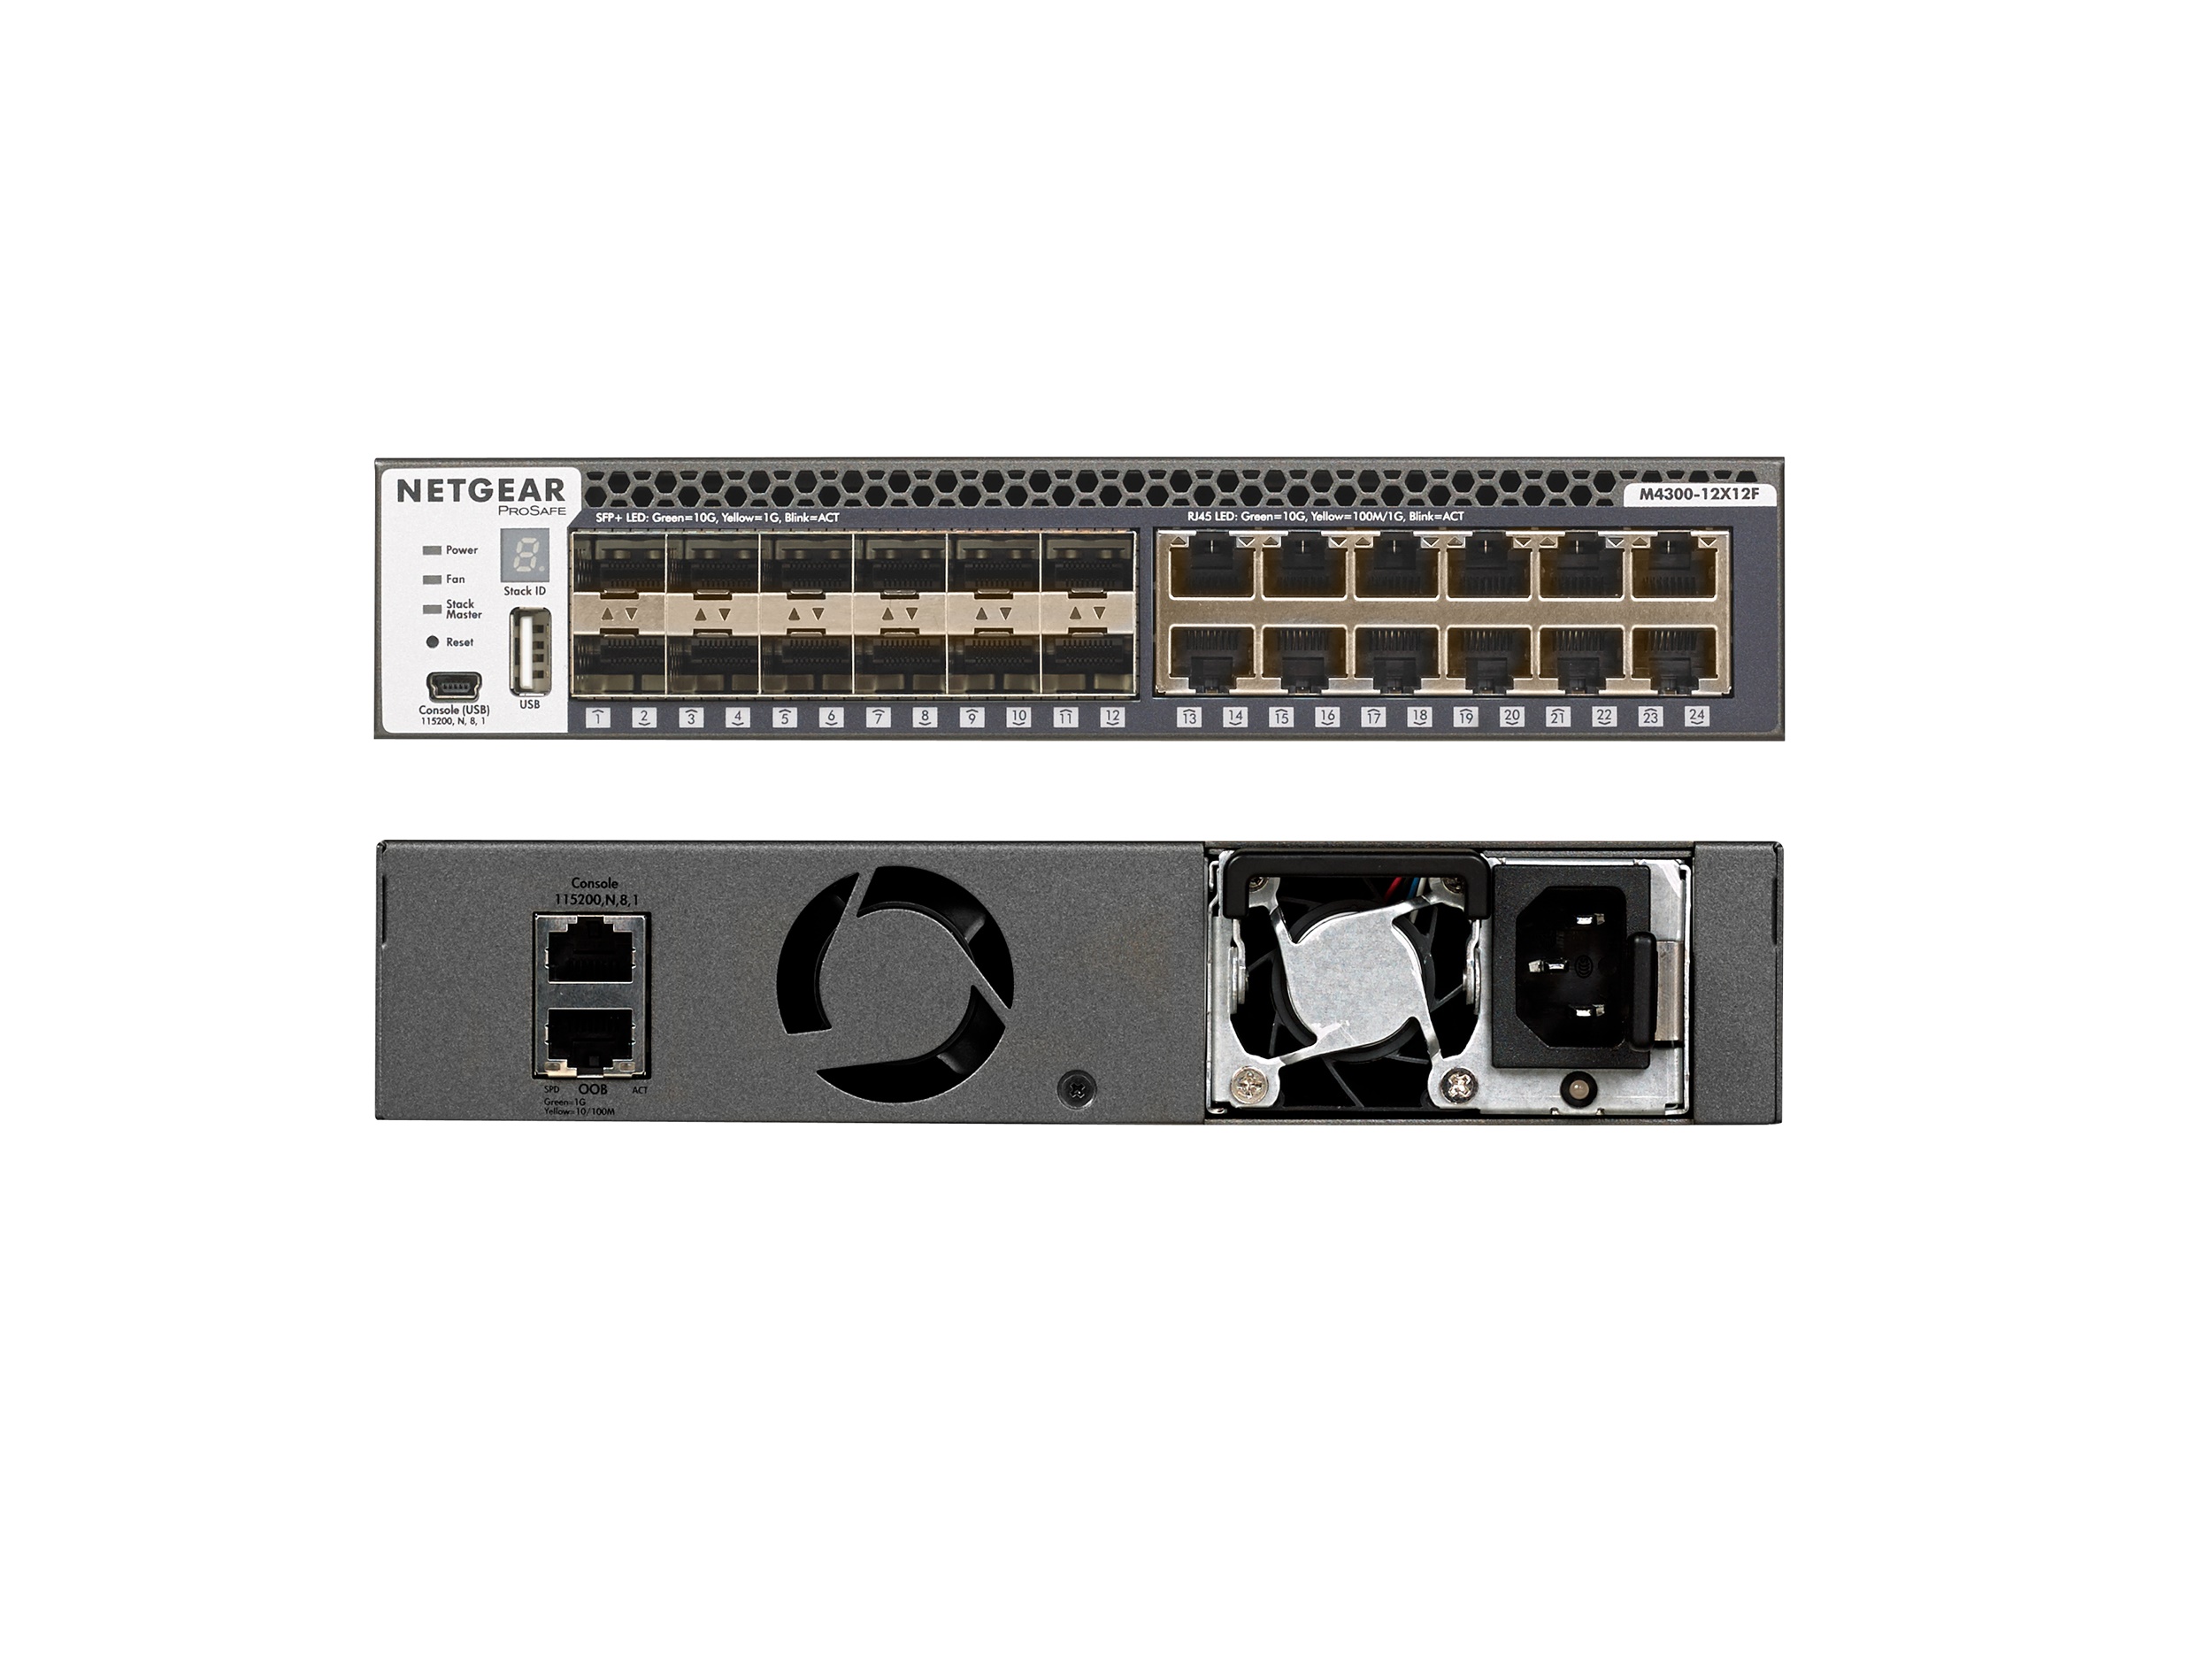 M4300-12X12F/EMEA NETGEAR Managed Switch with 12x10GBASE-T and 12xSFP Plus for KDS-8 Copper and Fiber Backbone by Kramer